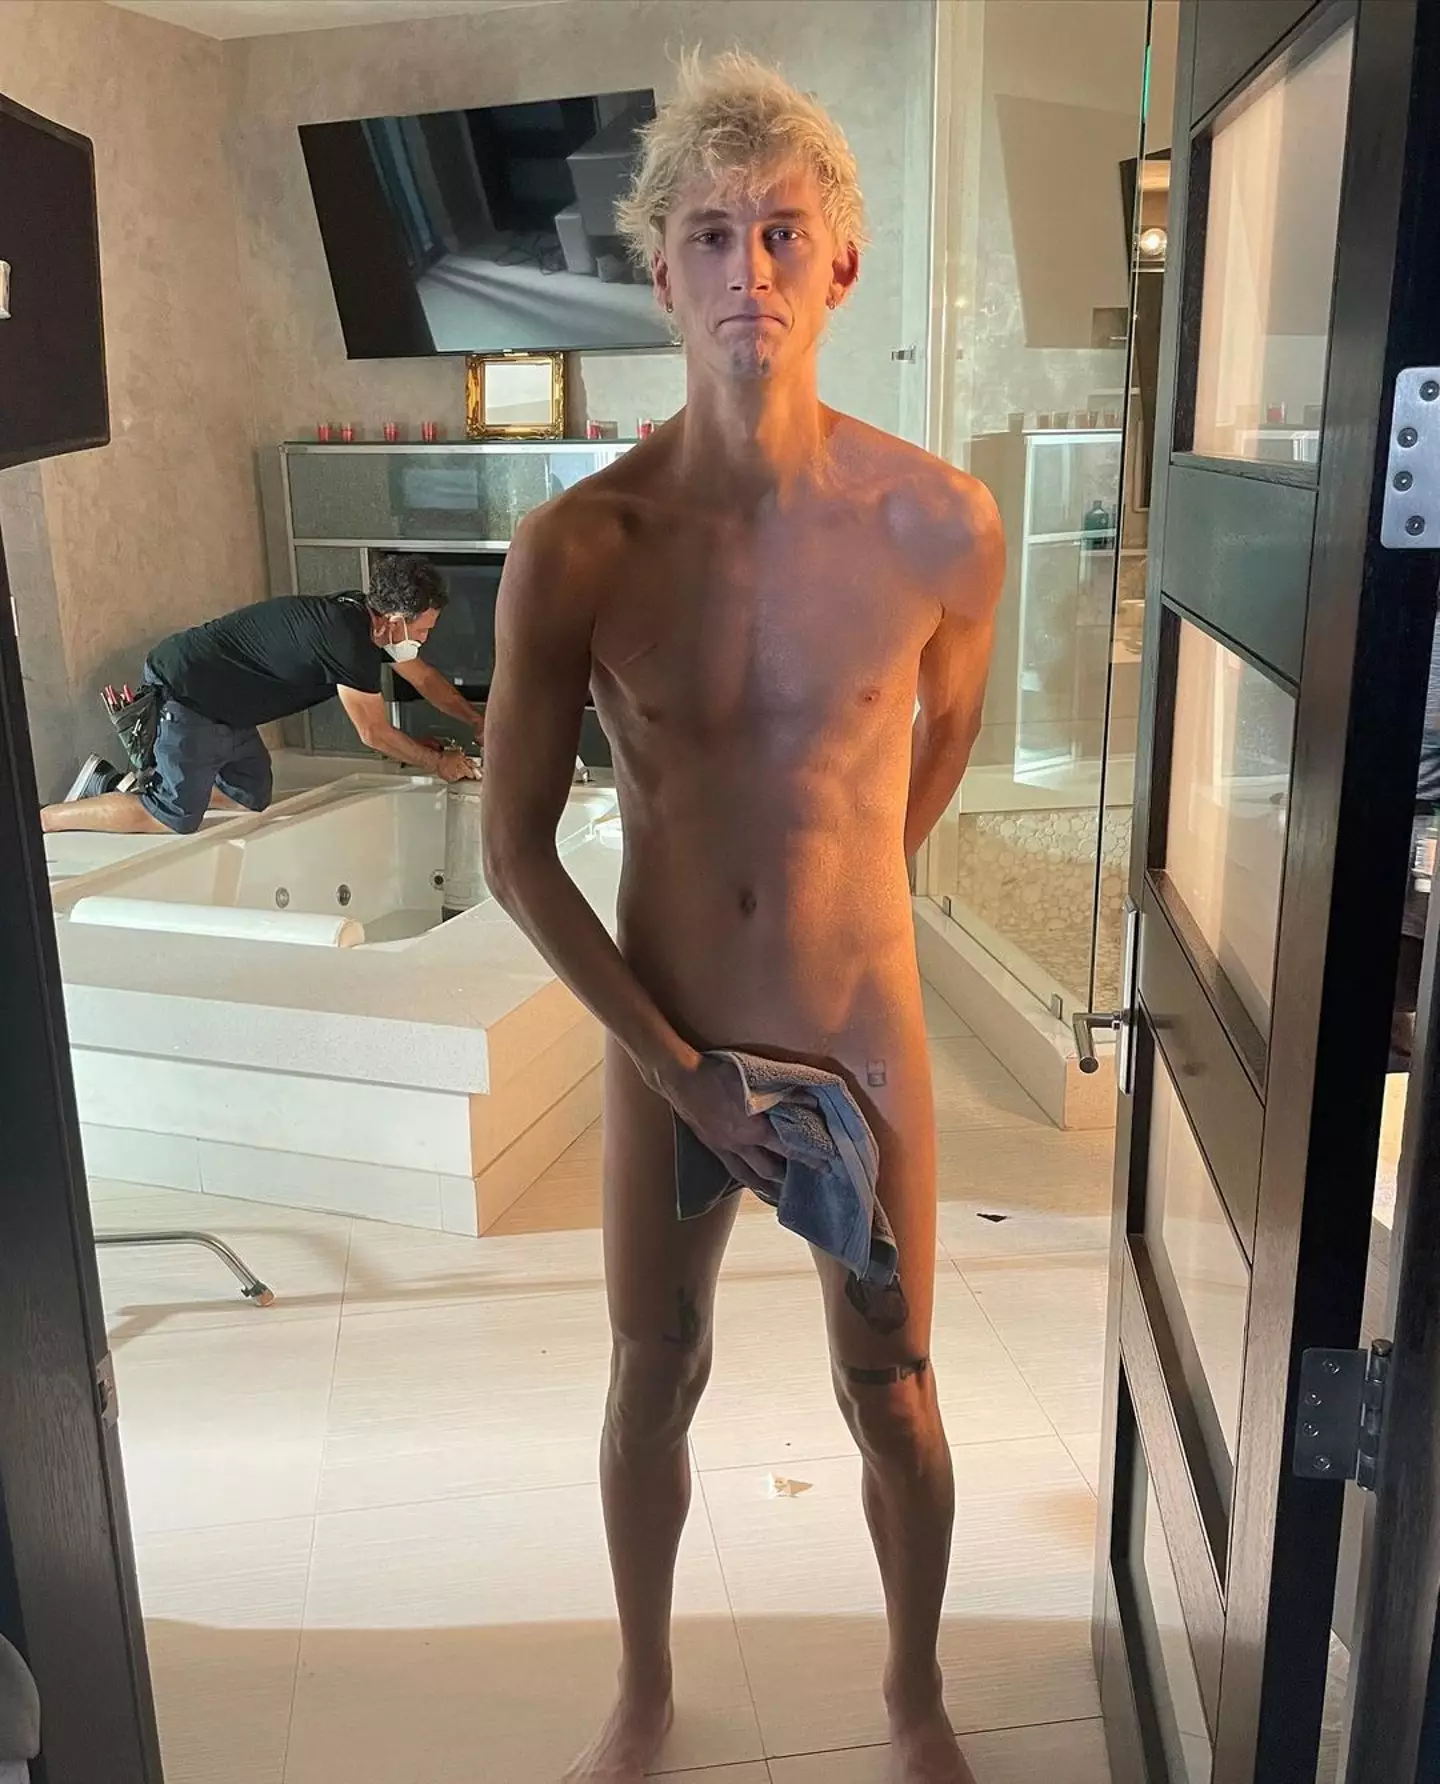 MGK without the tattoos takes some getting used to.